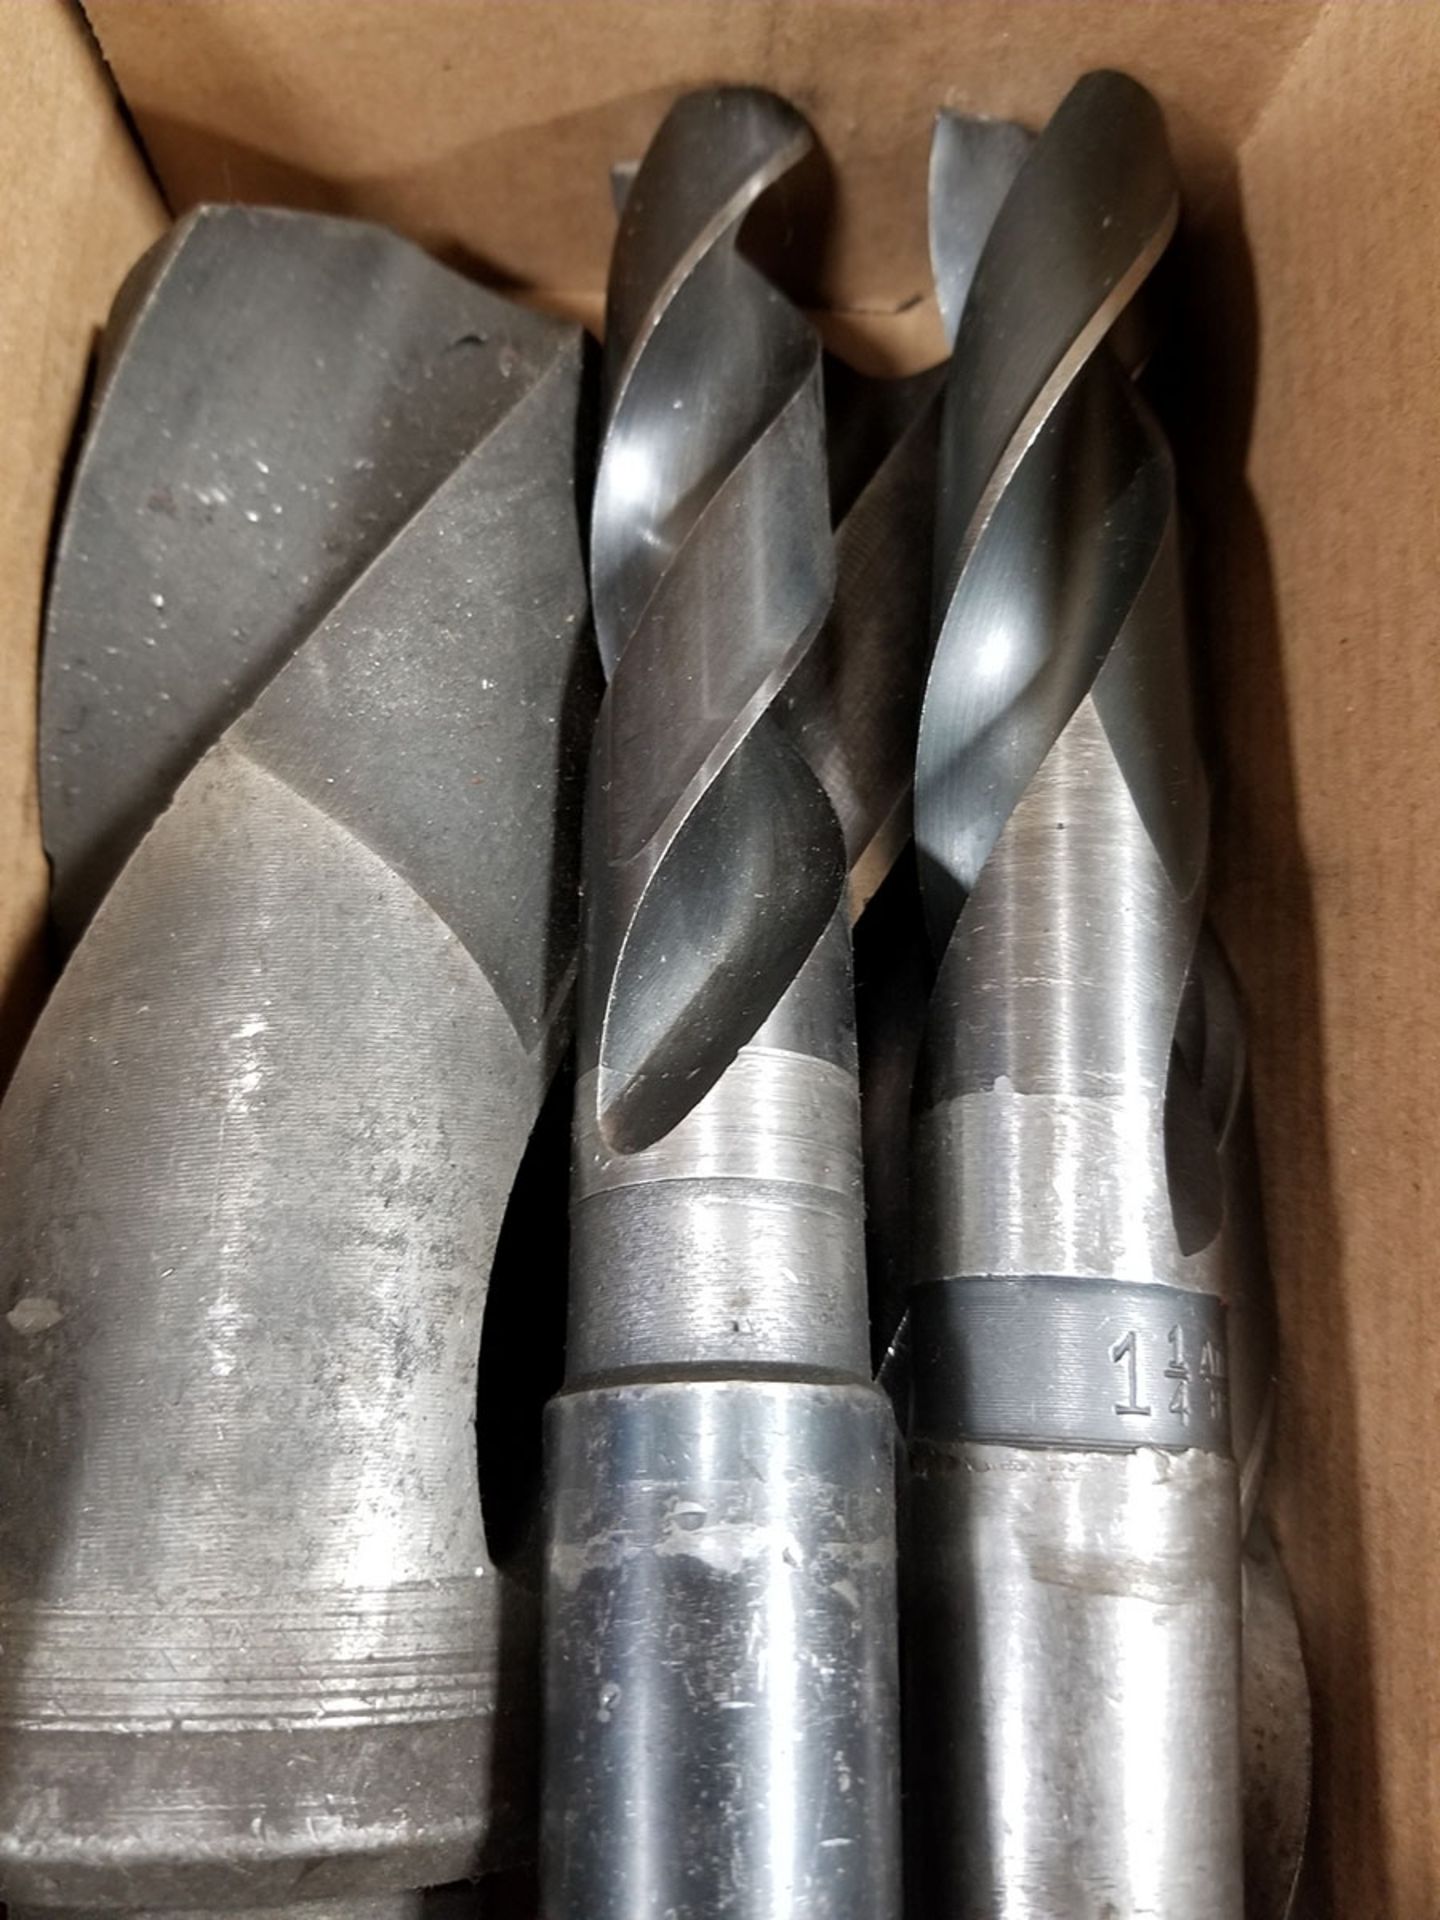 BOX OF LARGE TAPER SHANK DRILL BITS - Image 2 of 3